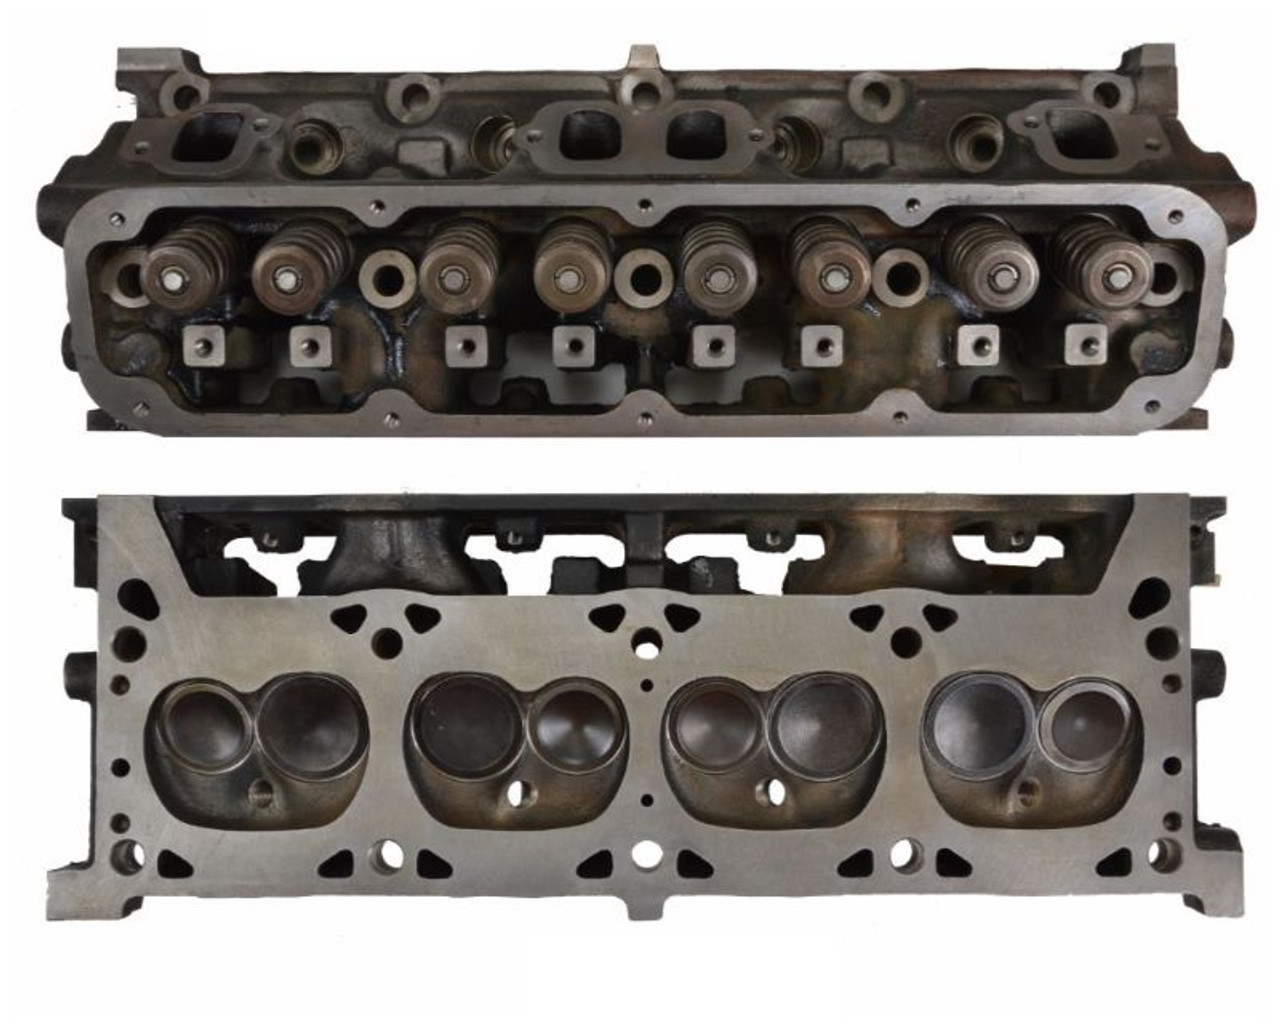 1997 Jeep Grand Cherokee 5.2L Engine Cylinder Head Assembly CH1080N -81